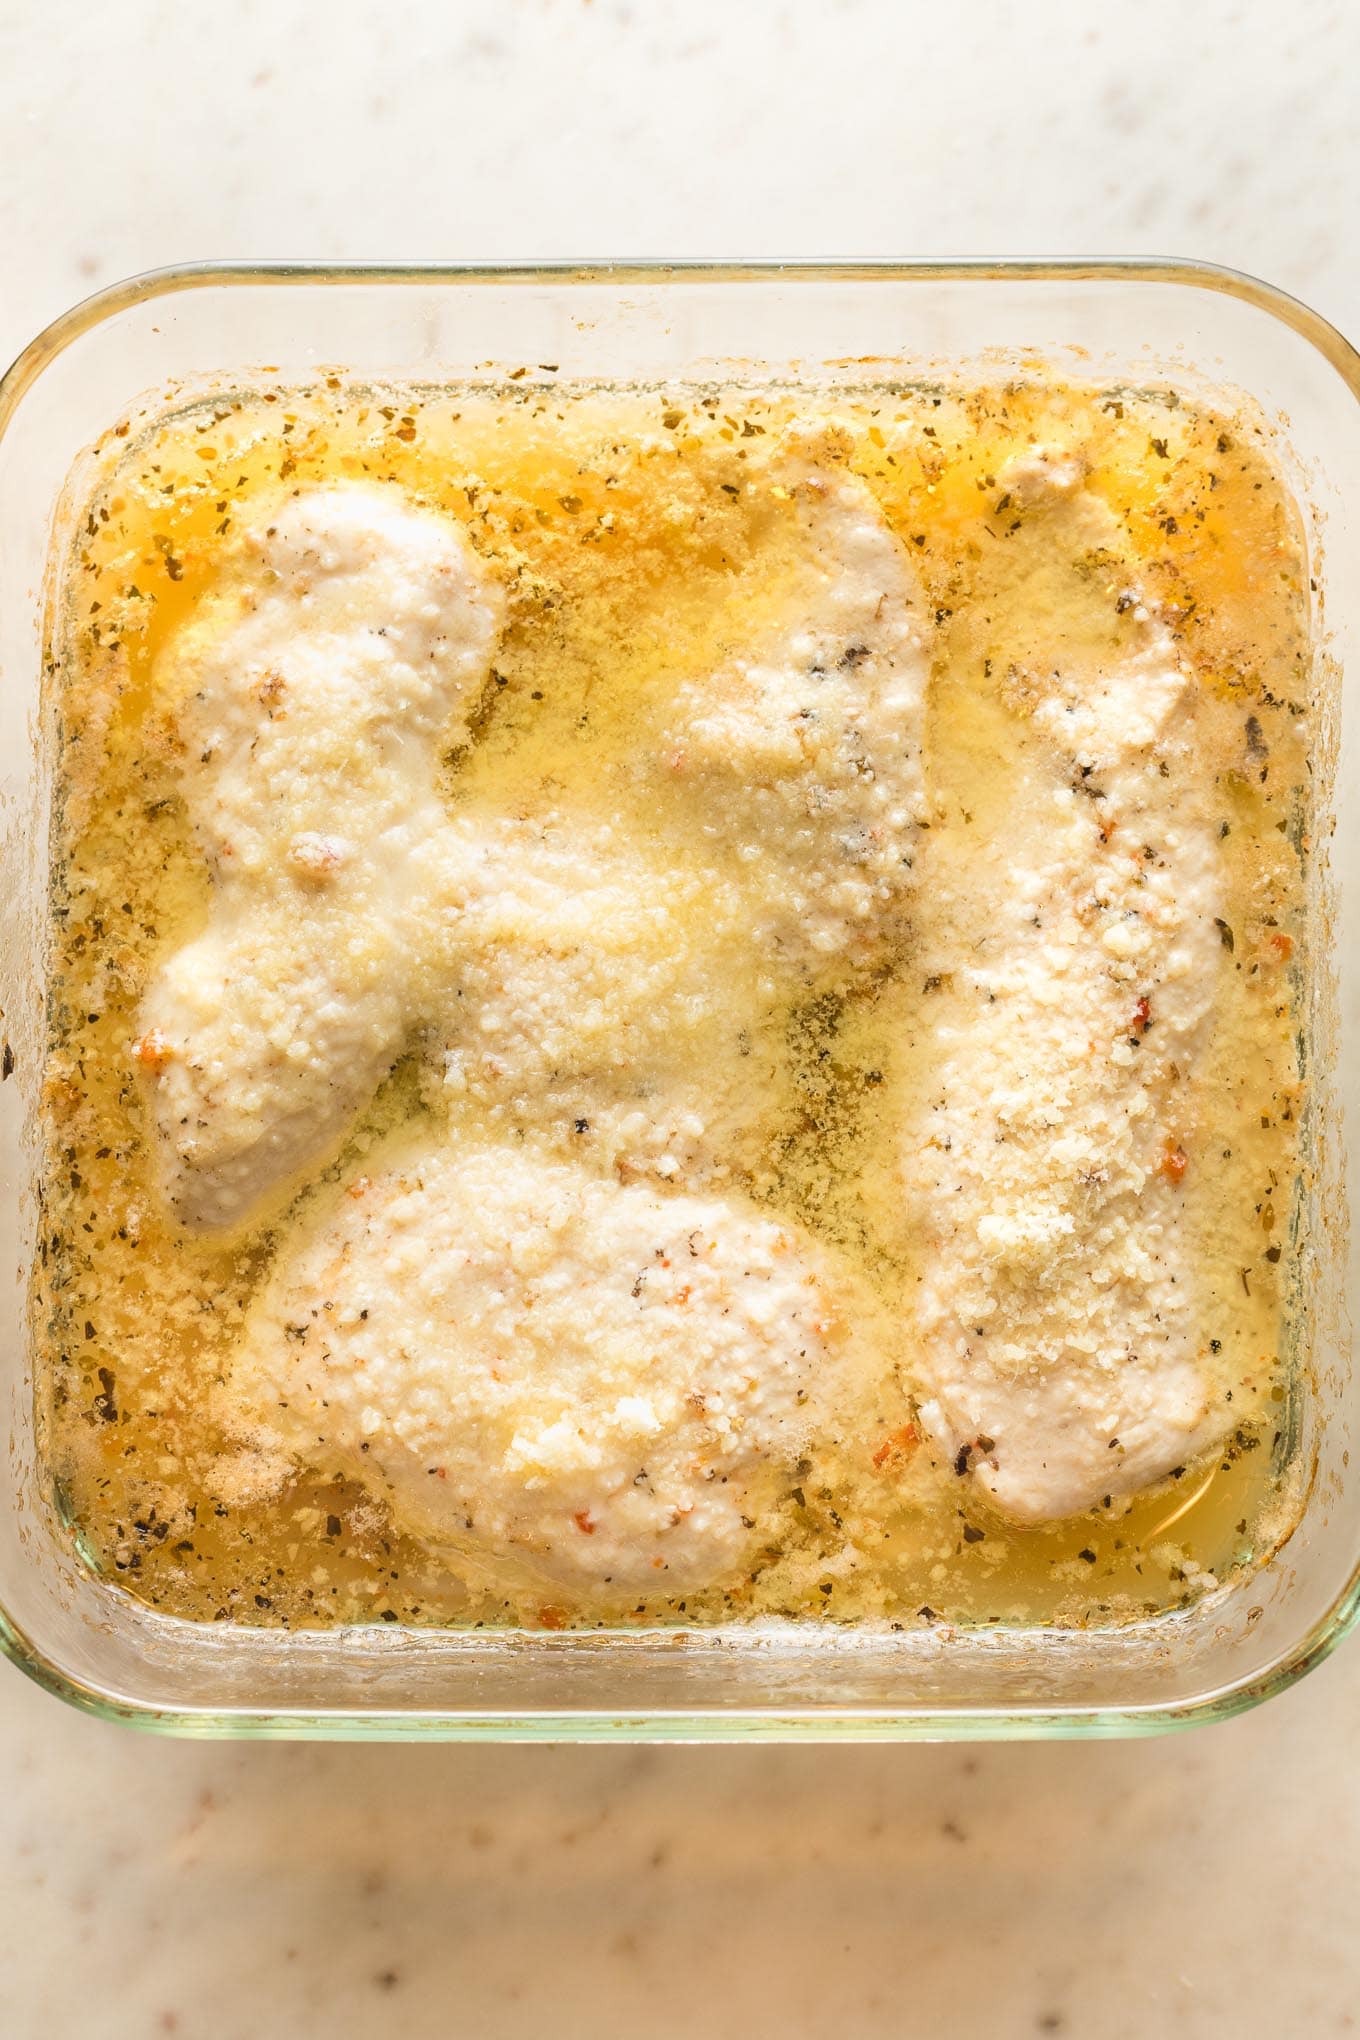 Mostly baked chicken with Parmesan cheese sprinkled on top.